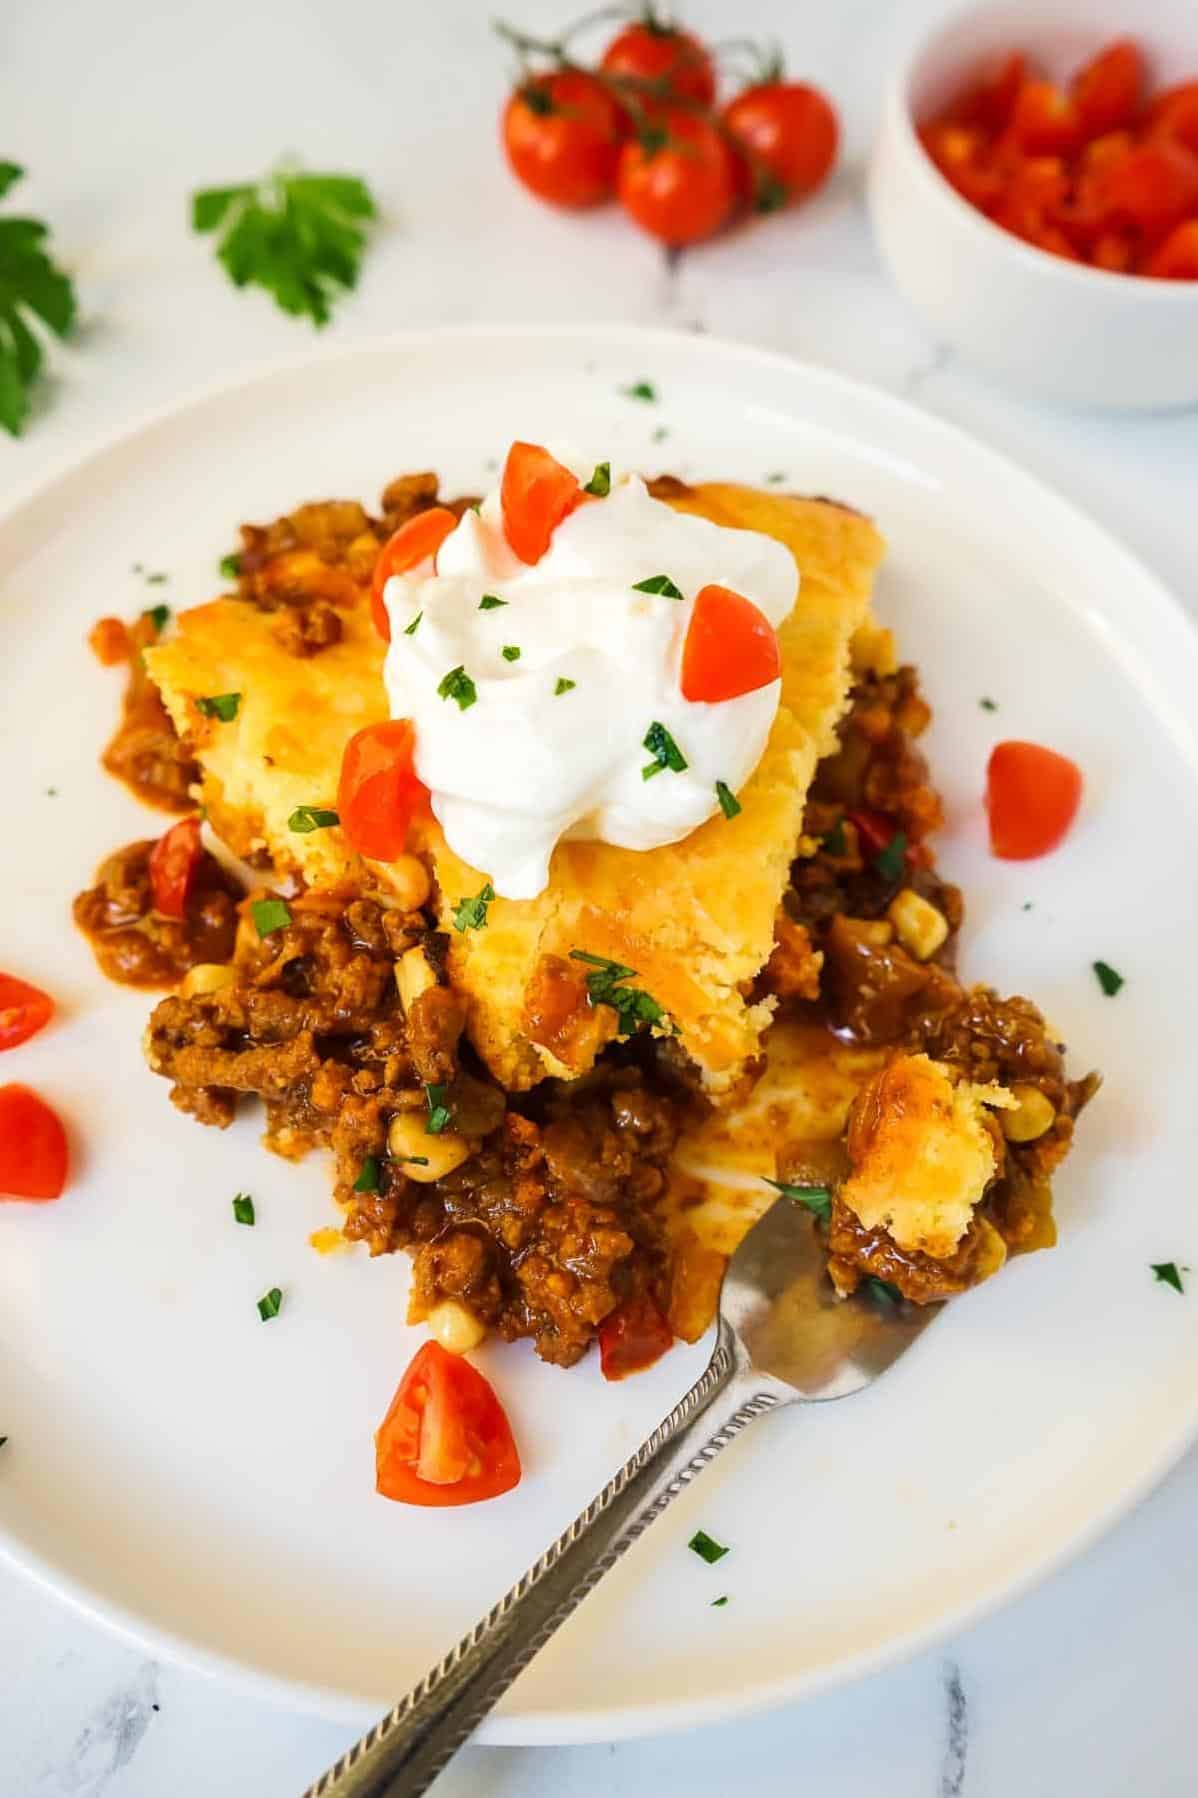  Mexican food lovers unite! This tamale pie has got all the spicy goodness you crave.